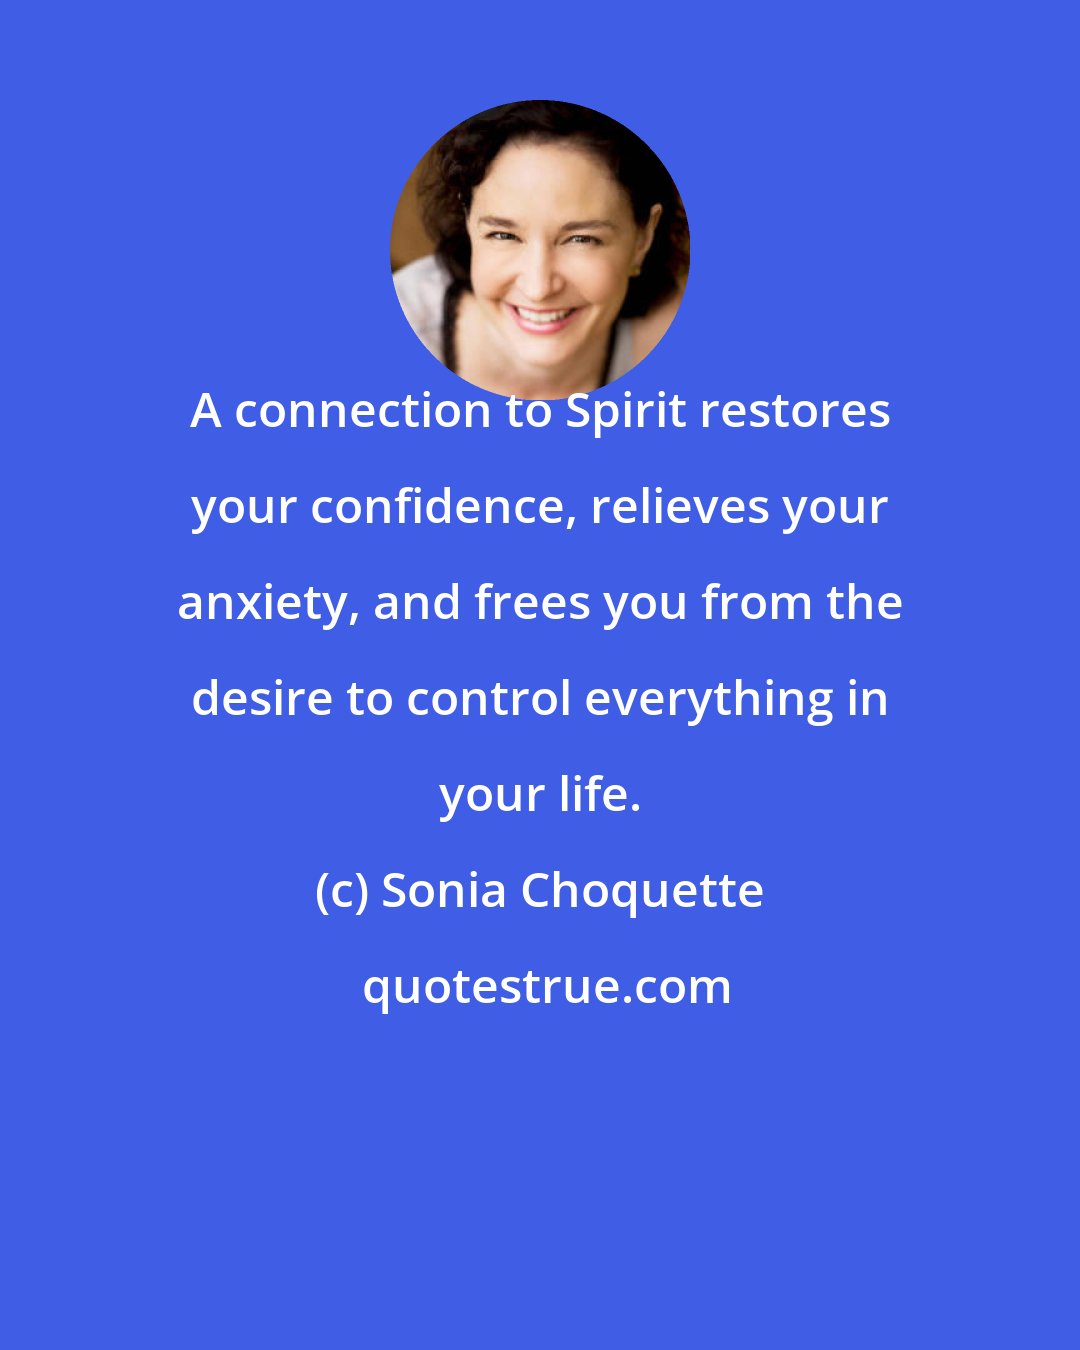 Sonia Choquette: A connection to Spirit restores your confidence, relieves your anxiety, and frees you from the desire to control everything in your life.